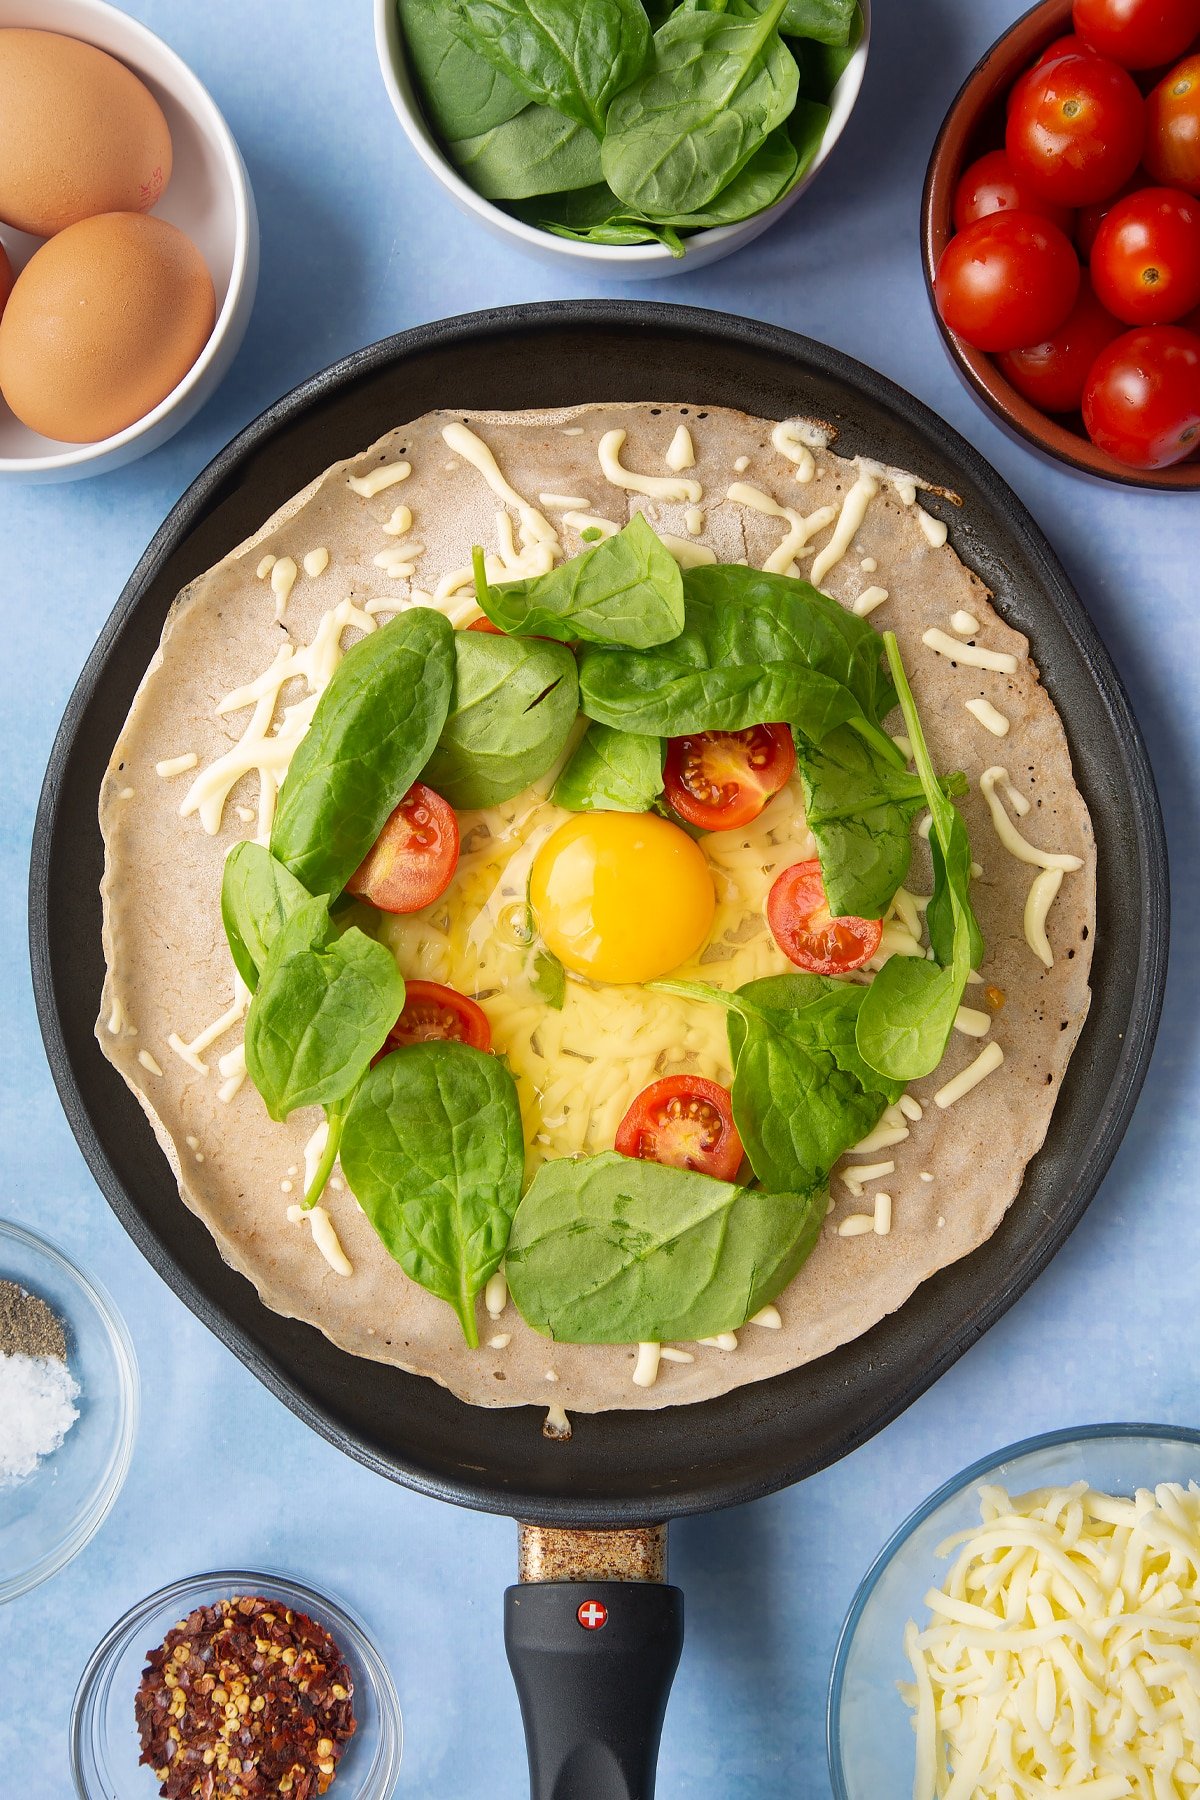 Buckwheat crepe topped with grated cheese, cherry tomatoes and spinach in a crepe pan. An egg has been cracked into the centre. Ingredients to make buckwheat galettes surround the pan.